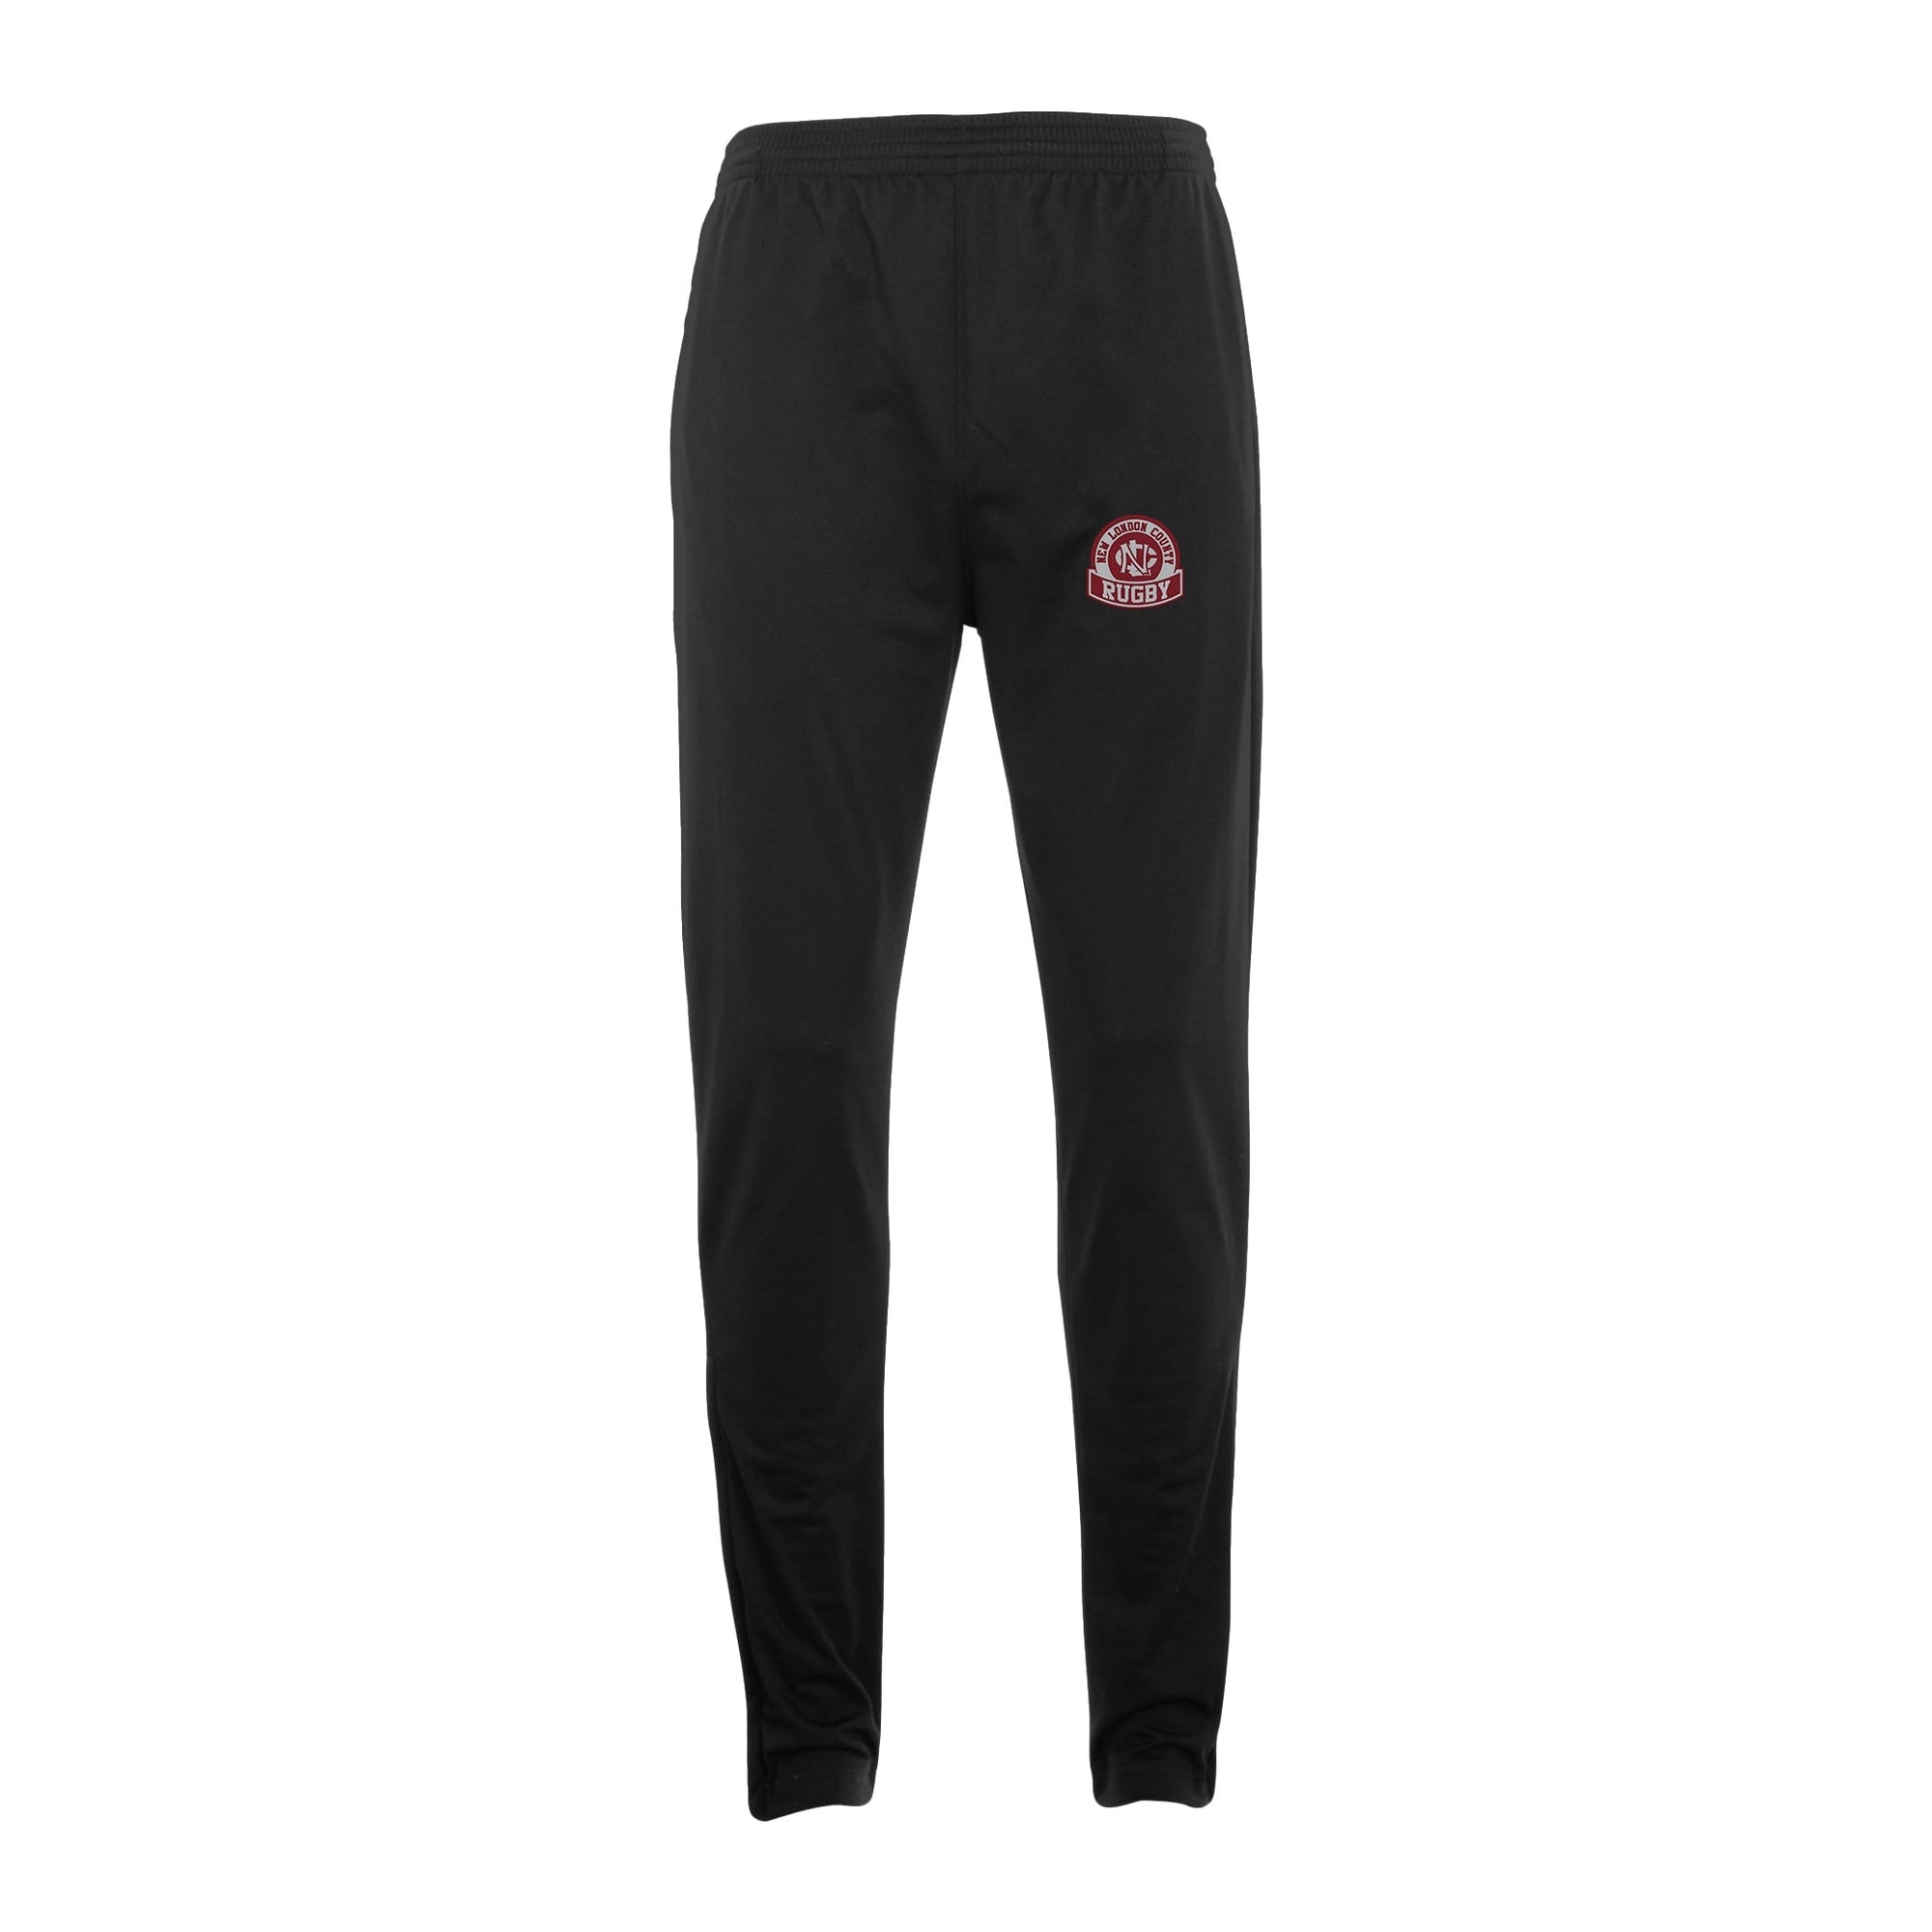 Rugby Imports New London County RFC Unisex Tapered Leg Pant